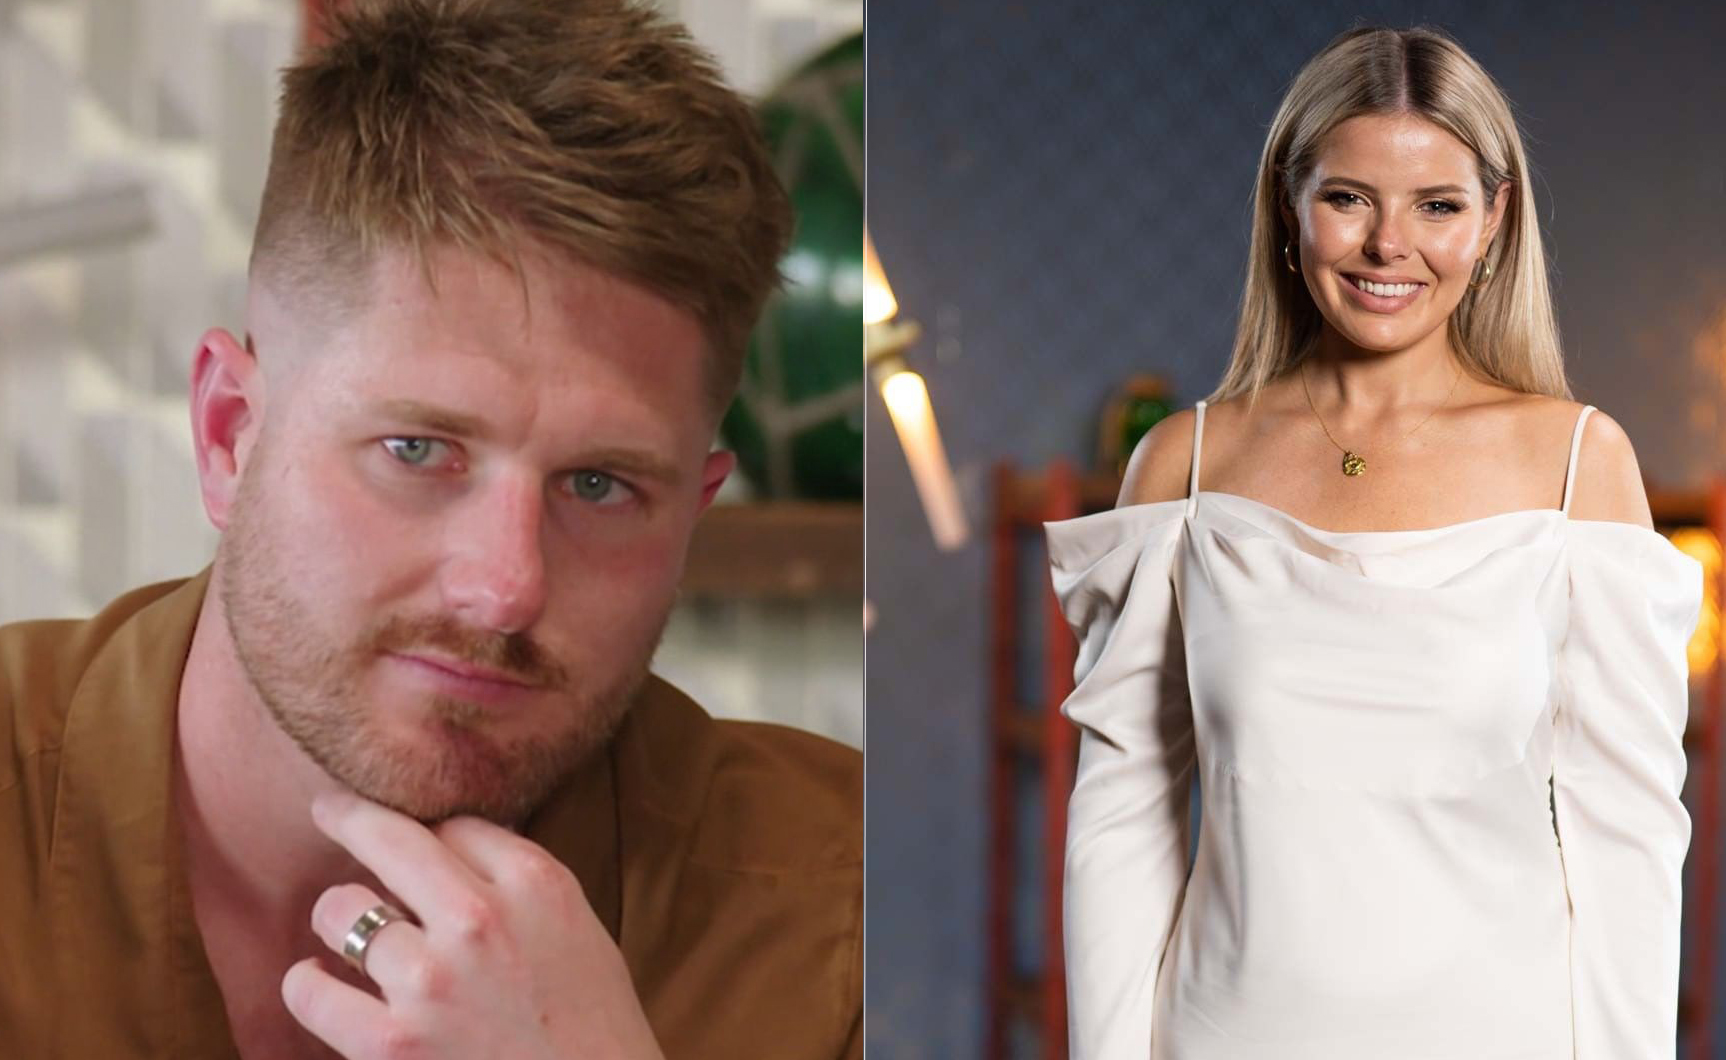 Bryce Ruthven jumps to Olivia Frazer’s defence and claims MAFS producers “forced” the nude photo scandal